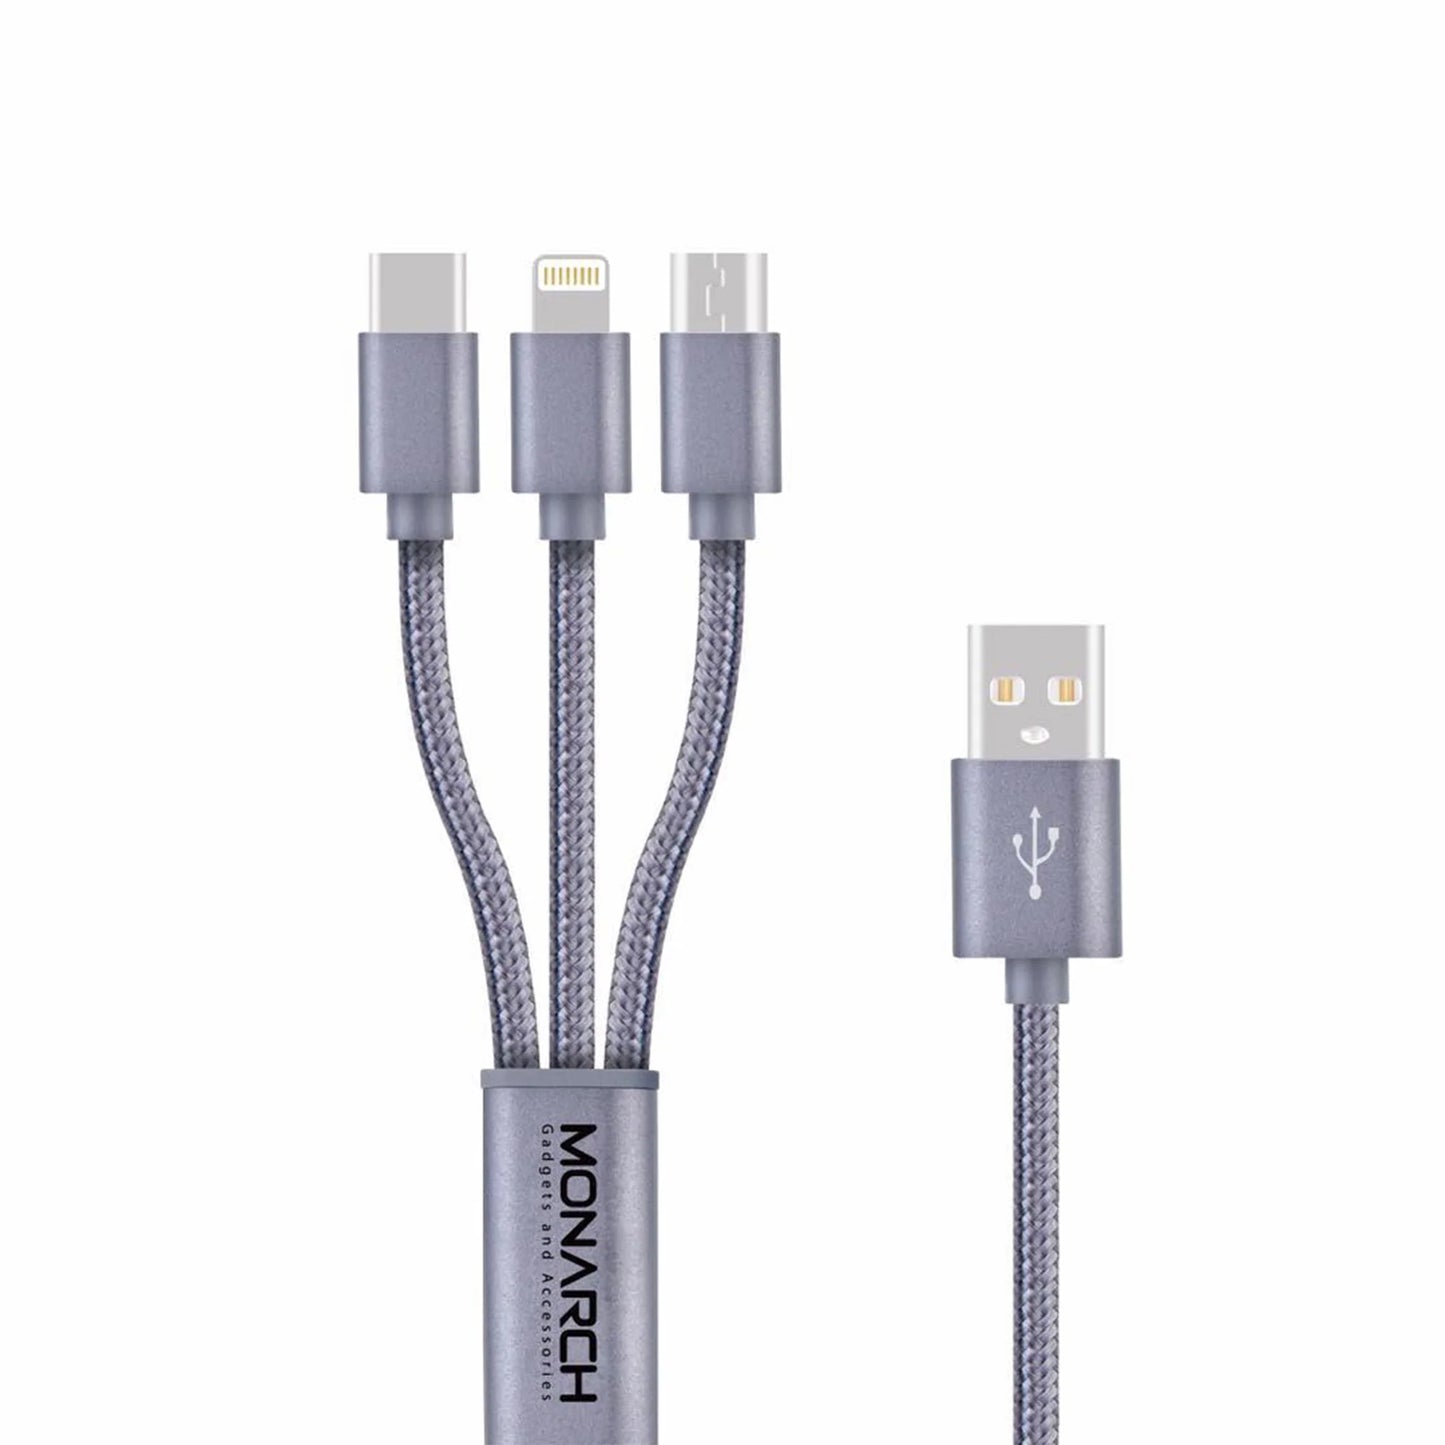 Monarch Trio 3in1 USB Fast Charging Cable - Grey | 1.1 Metres